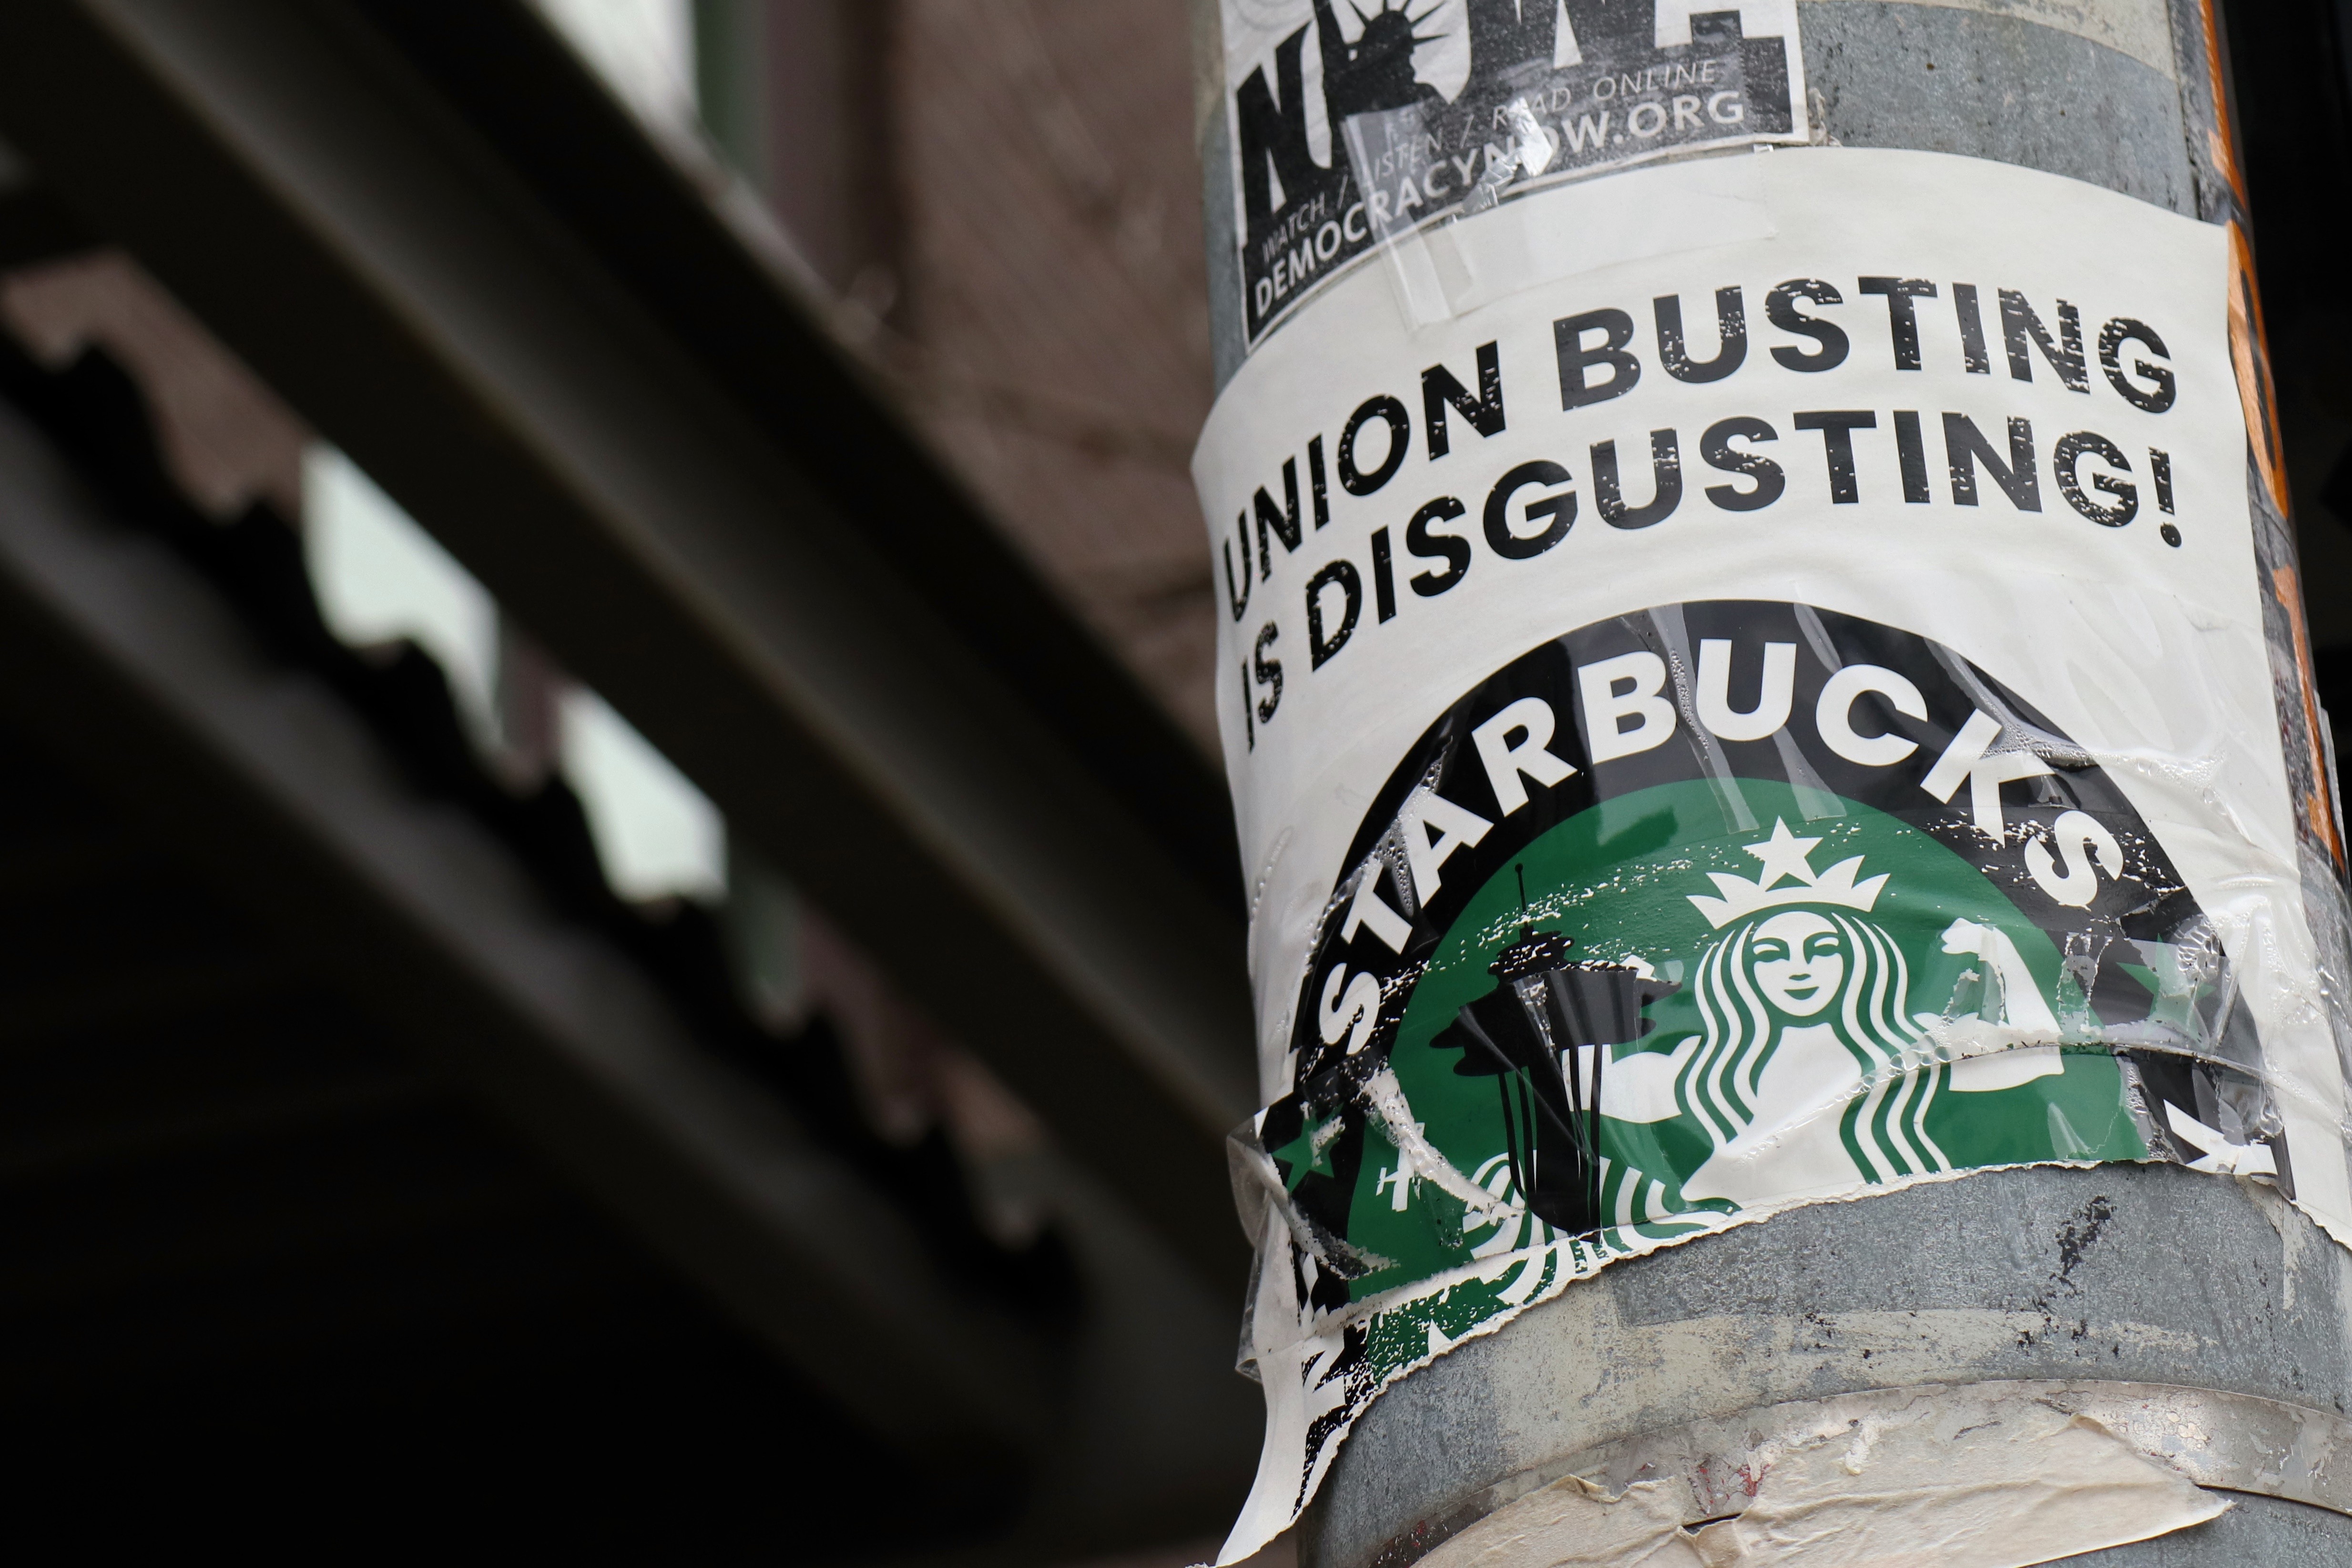 Starbucks' union-busting campaign is so much worse than you think.